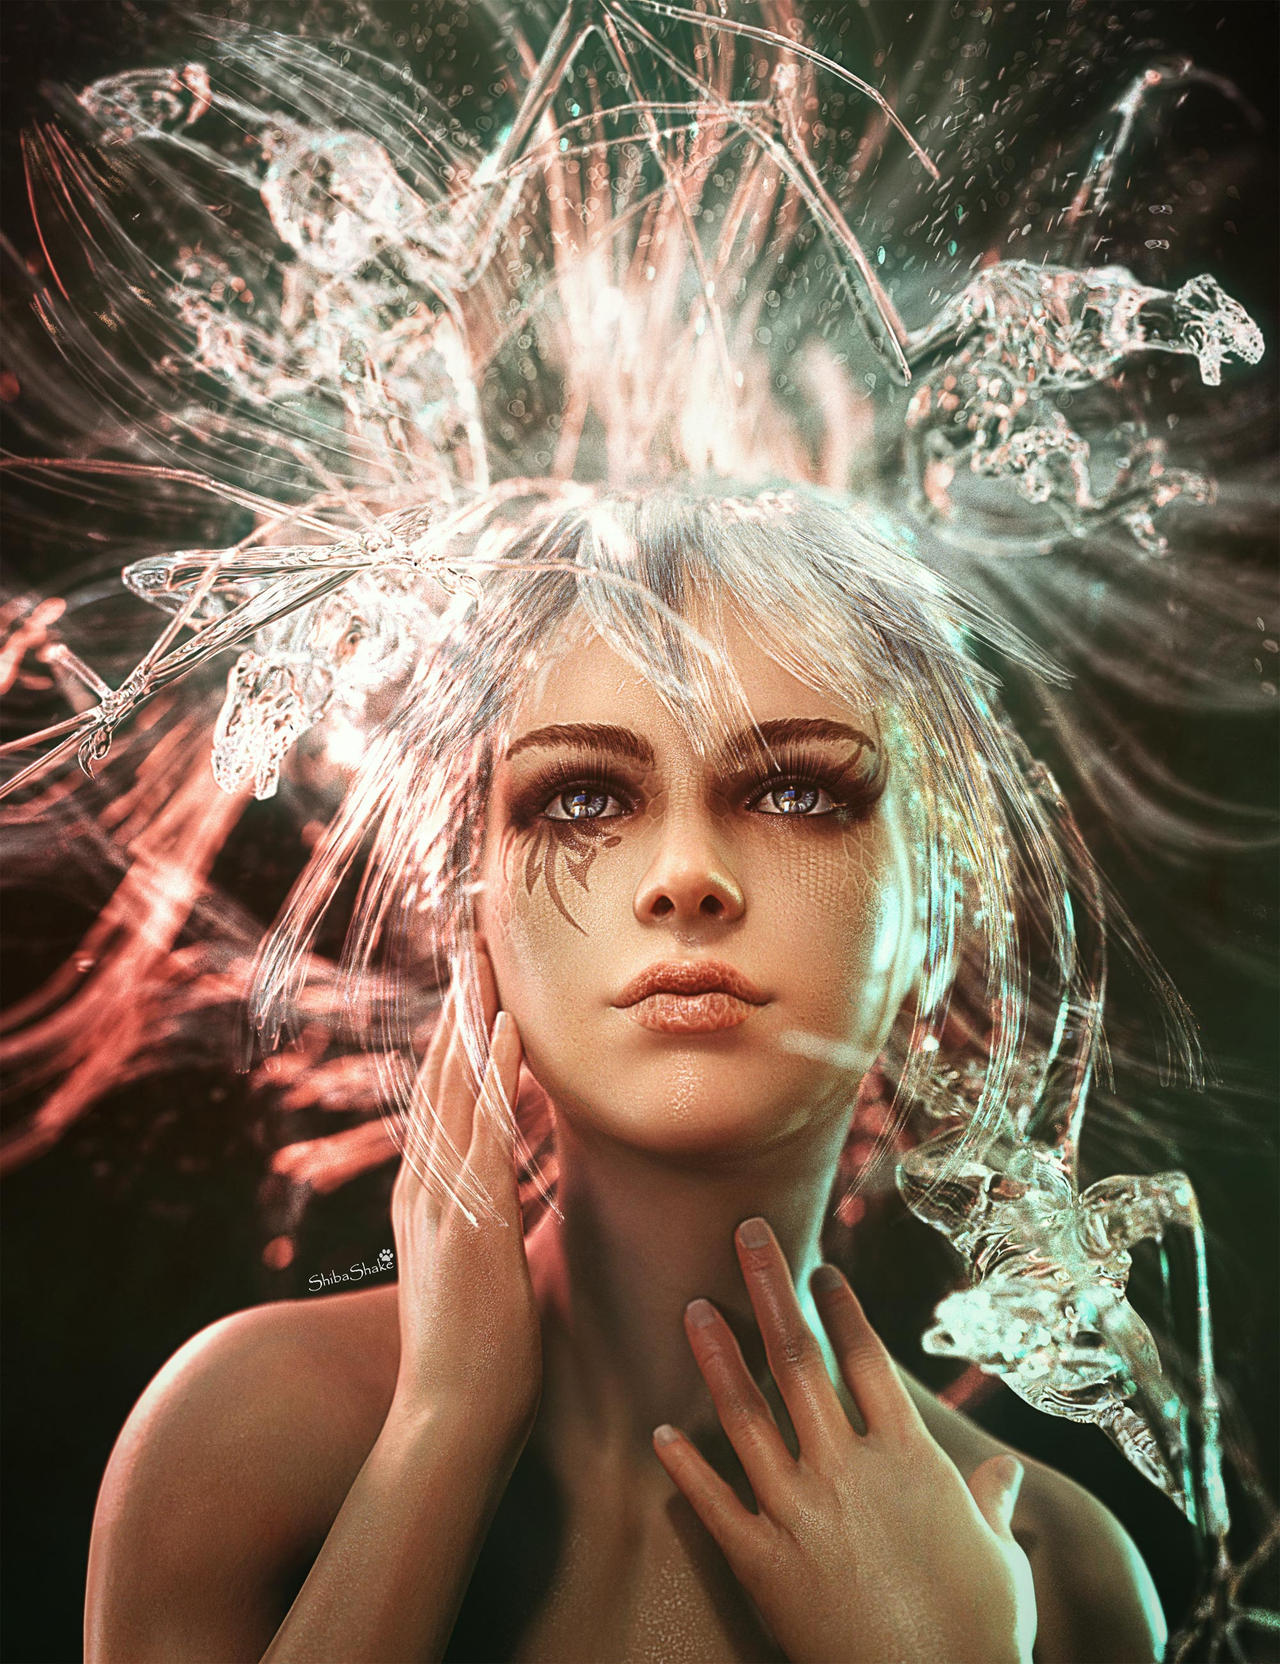 Fantasy girl portrait art with water dragons flying out of her head and water material hair. Everything is changeable. Fantasy woman art. Daz Studio Iray image.